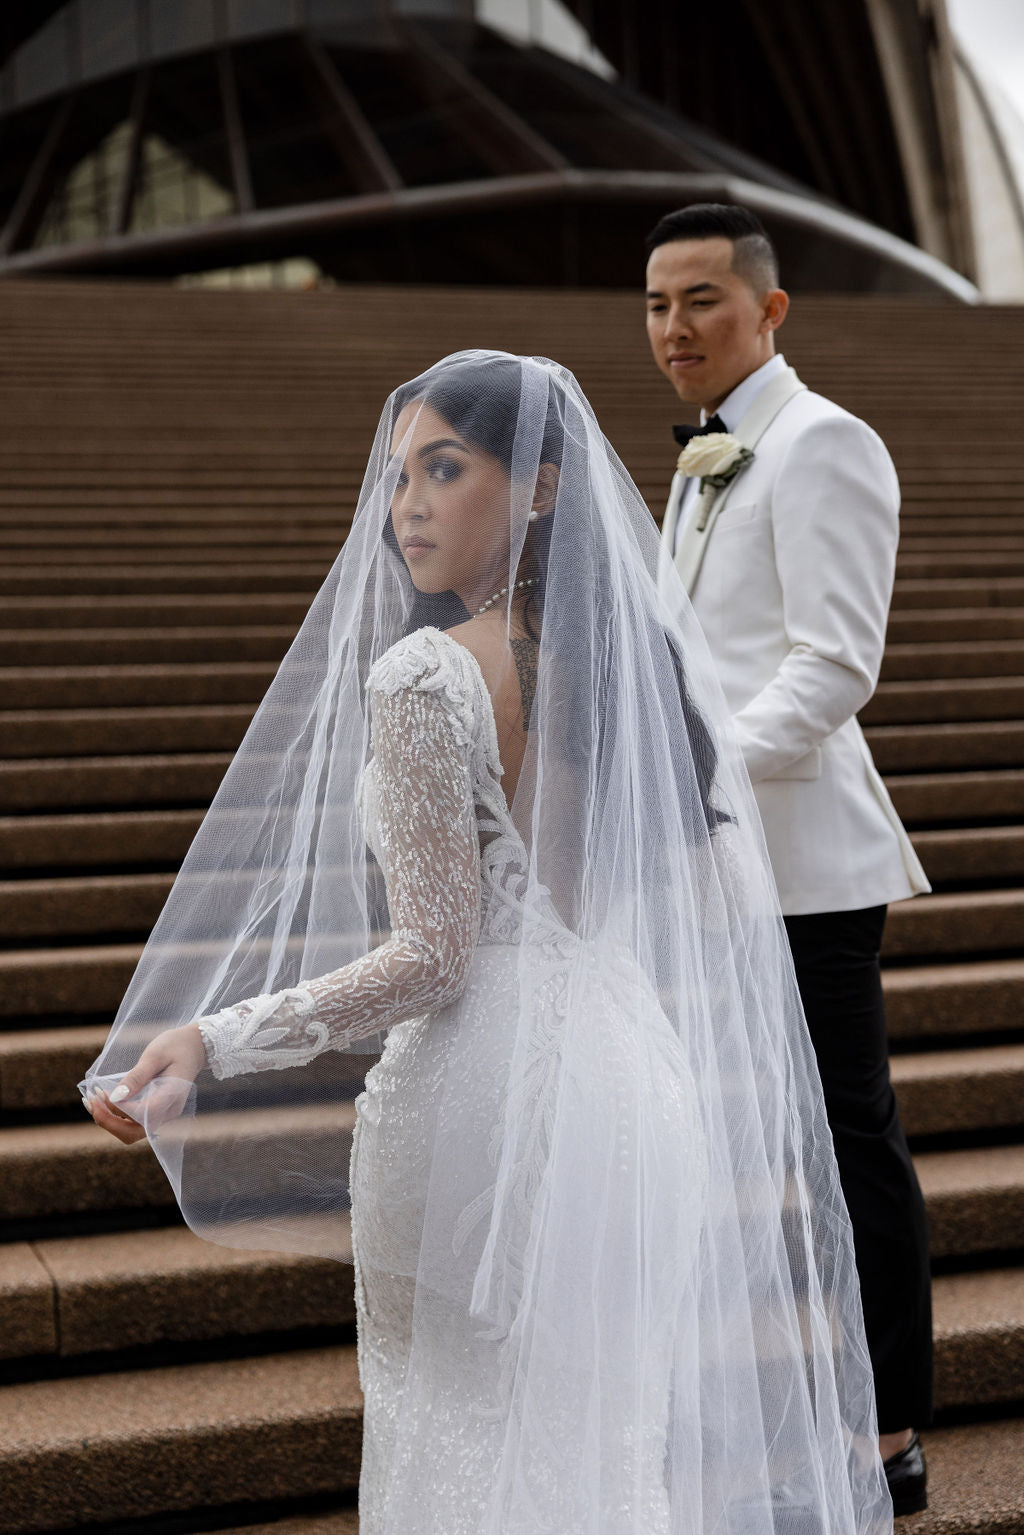 bride in wedding dress and veil holding hands with man in suit on staircase